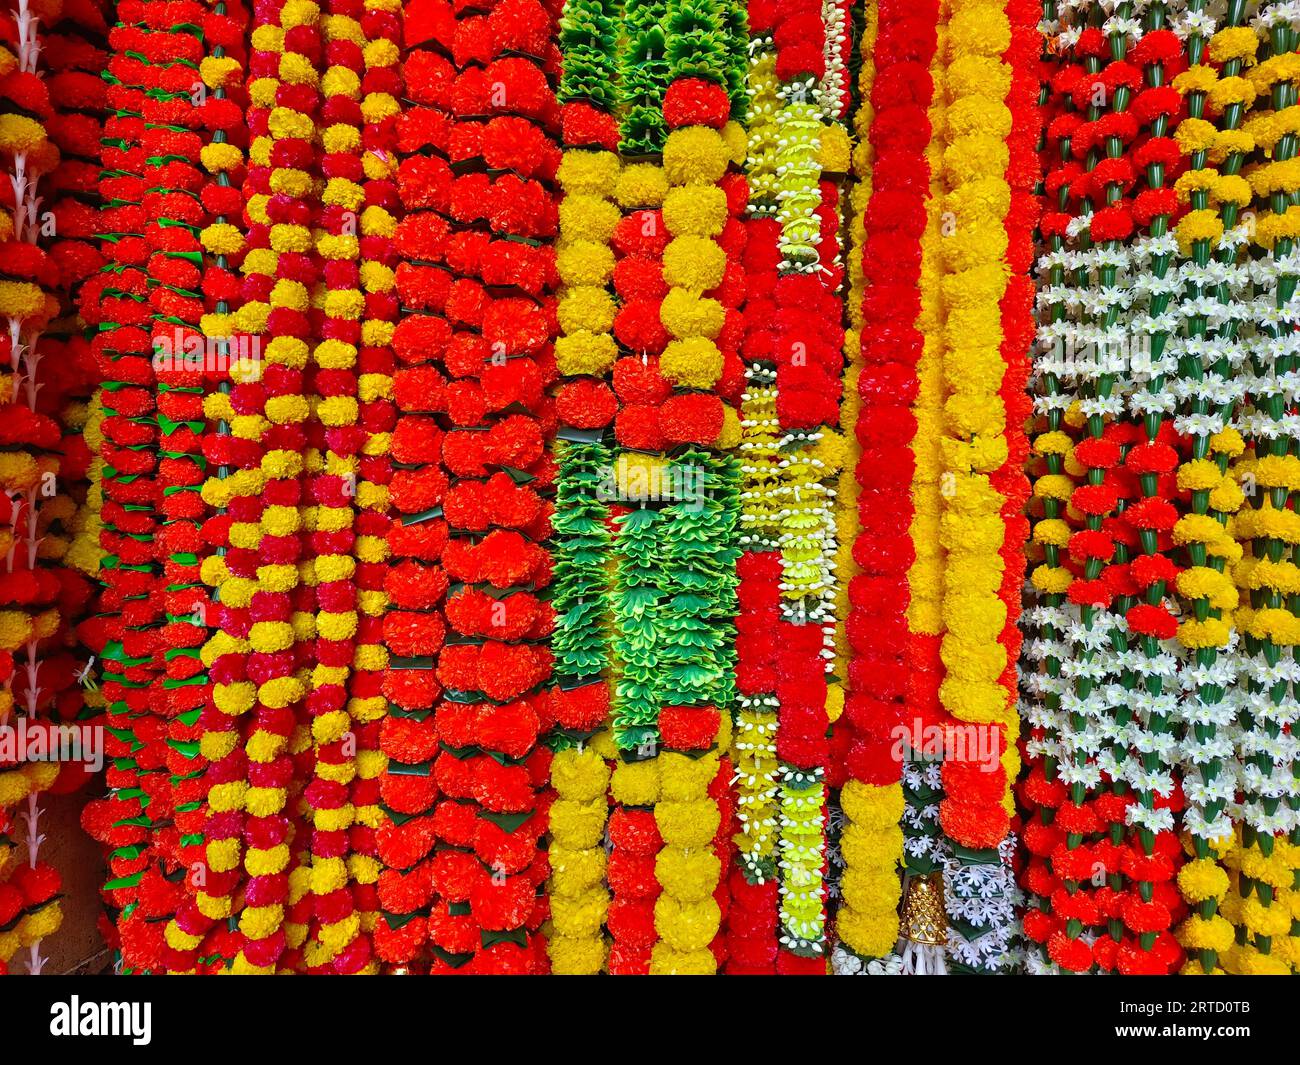 Multicolour artificial flowers used for Diwali festival decoration ...